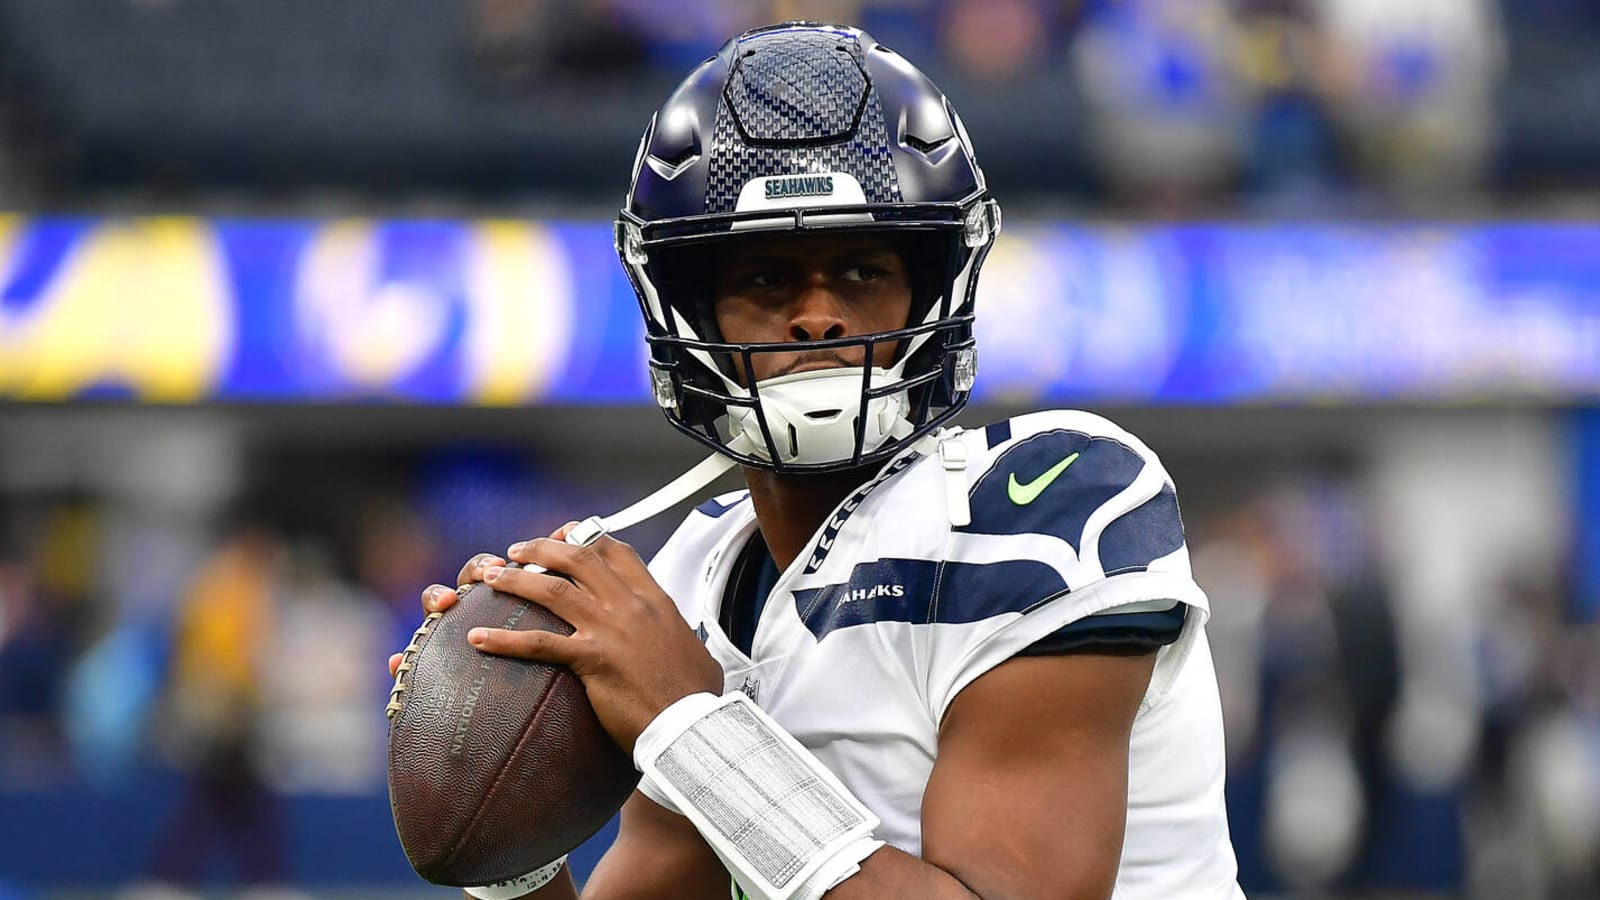 Seahawks' late-season slide could put them back in play for QB in NFL Draft